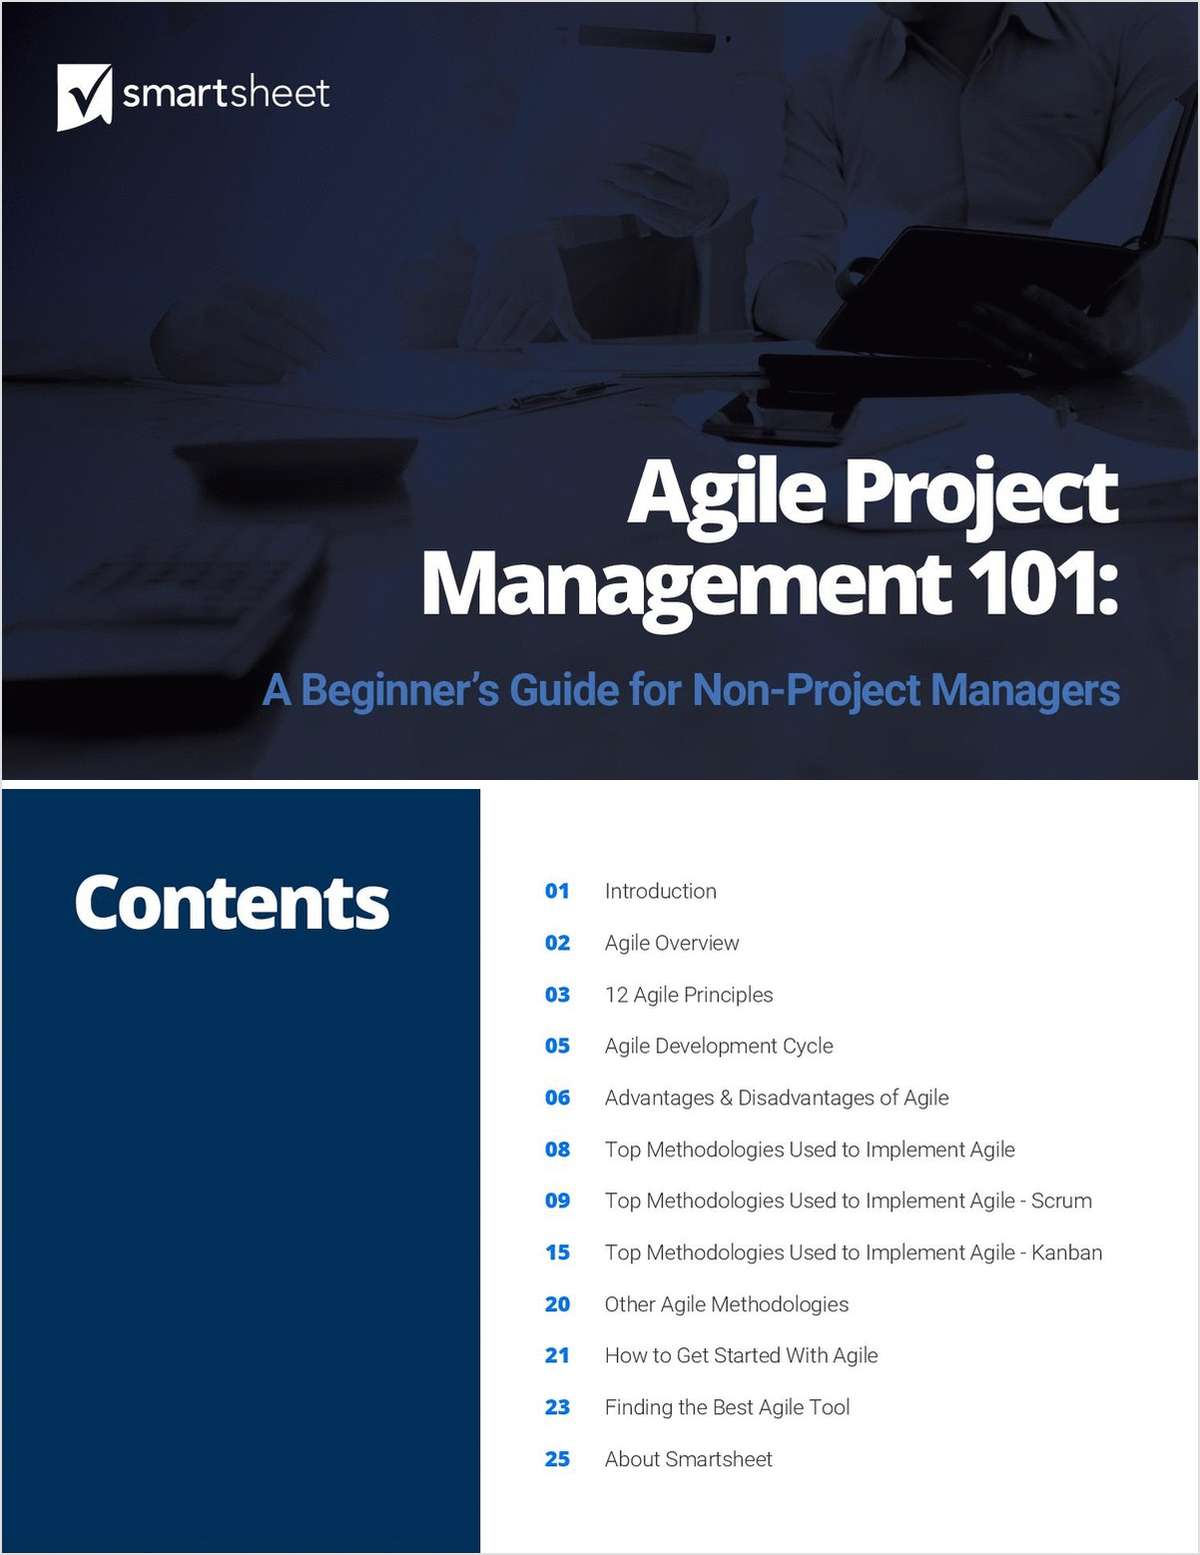 Agile Project Management 101: A Beginner's Guide